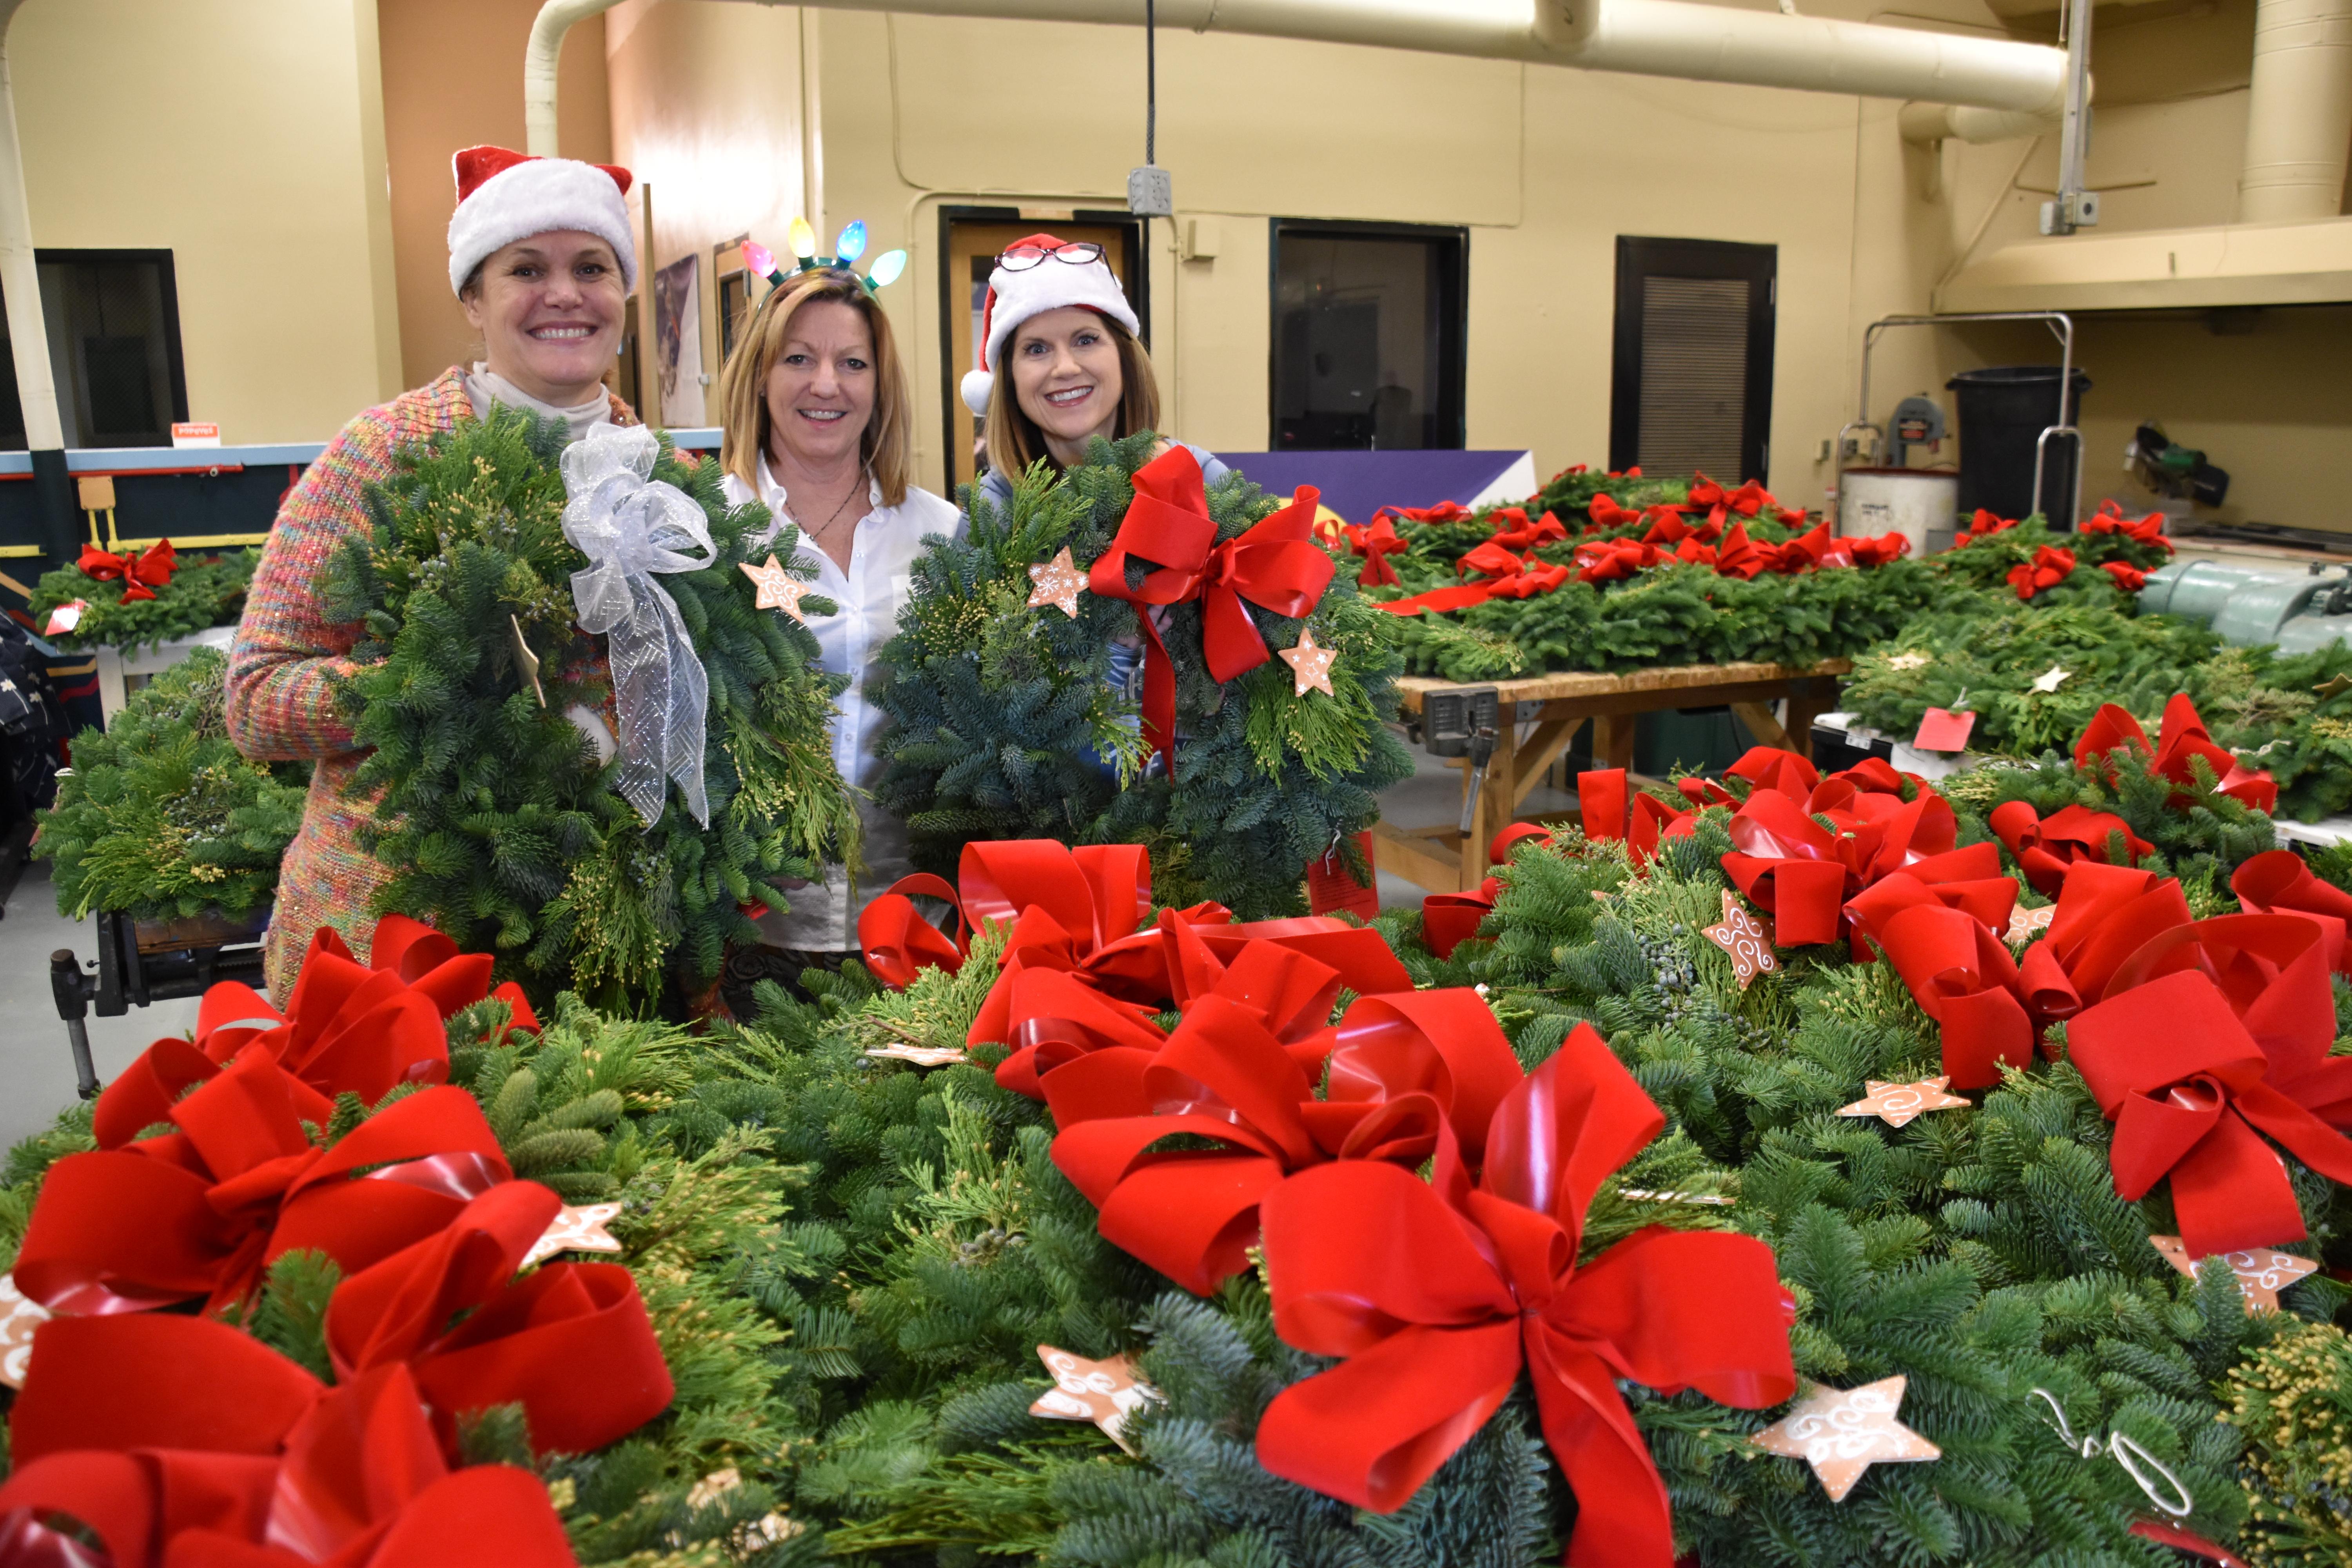 Volunteers with completed wreaths